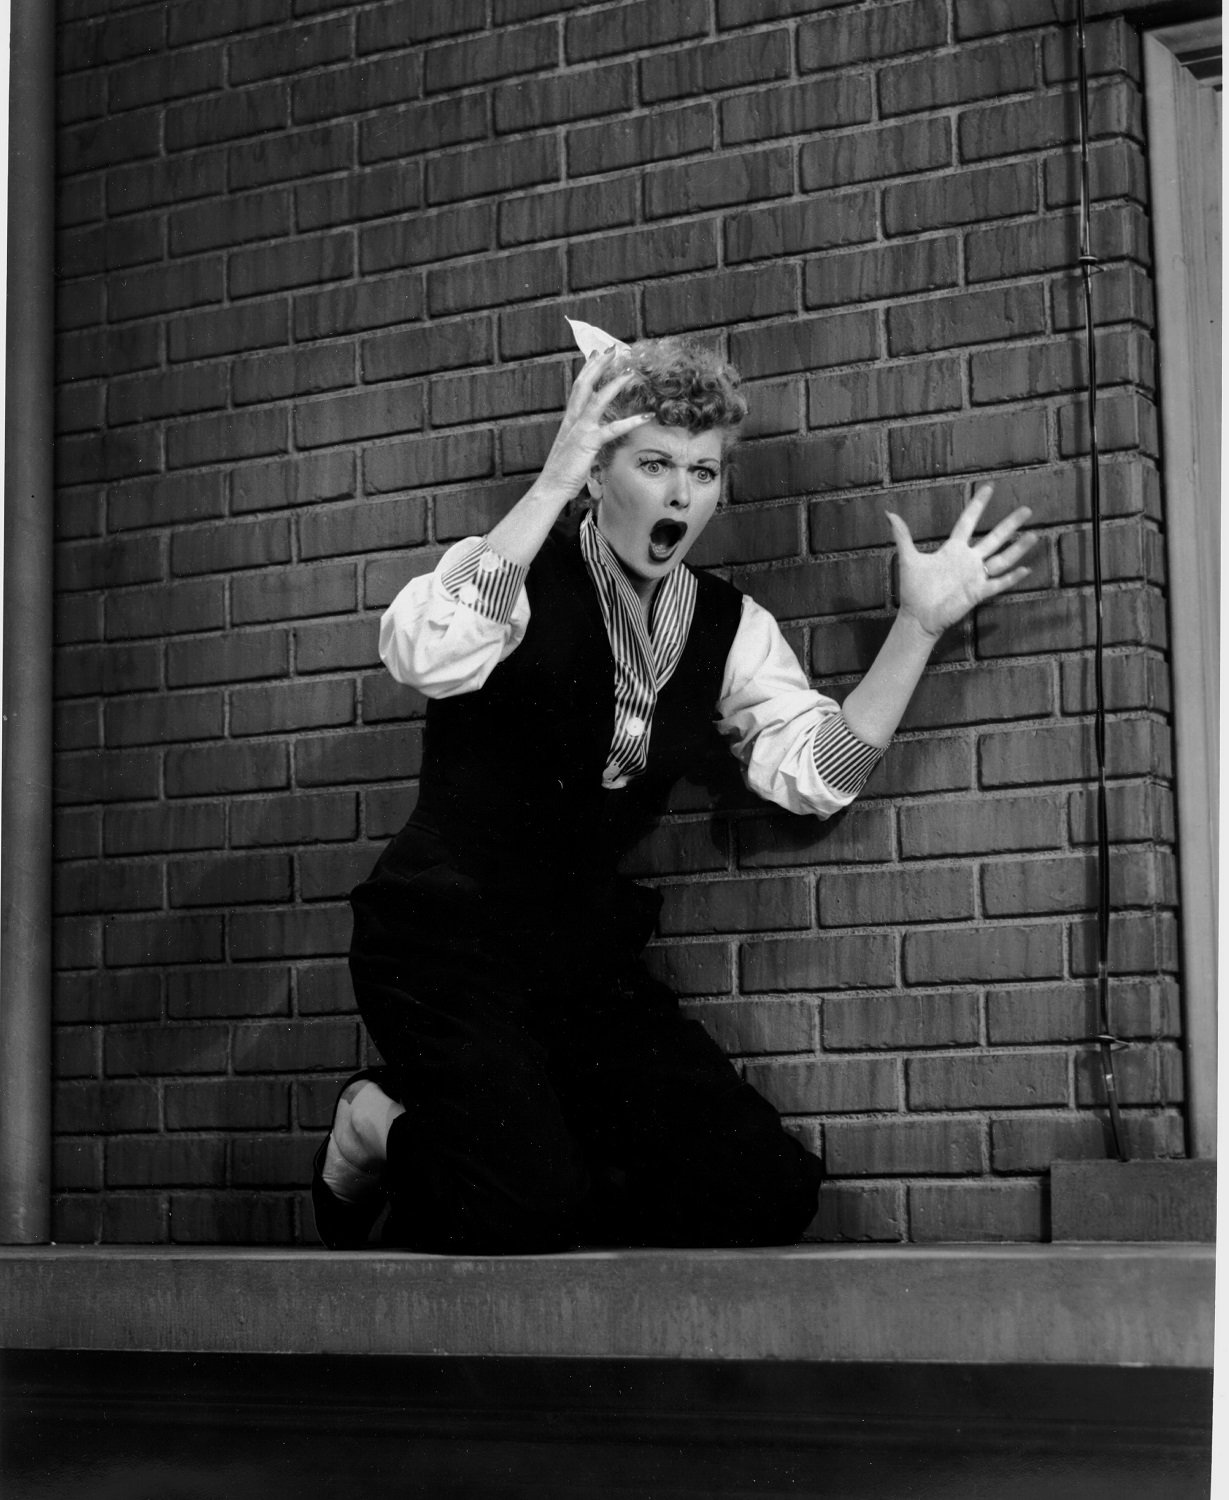 Lucille Ball as Lucy Ricardo in 'I Love Lucy' 